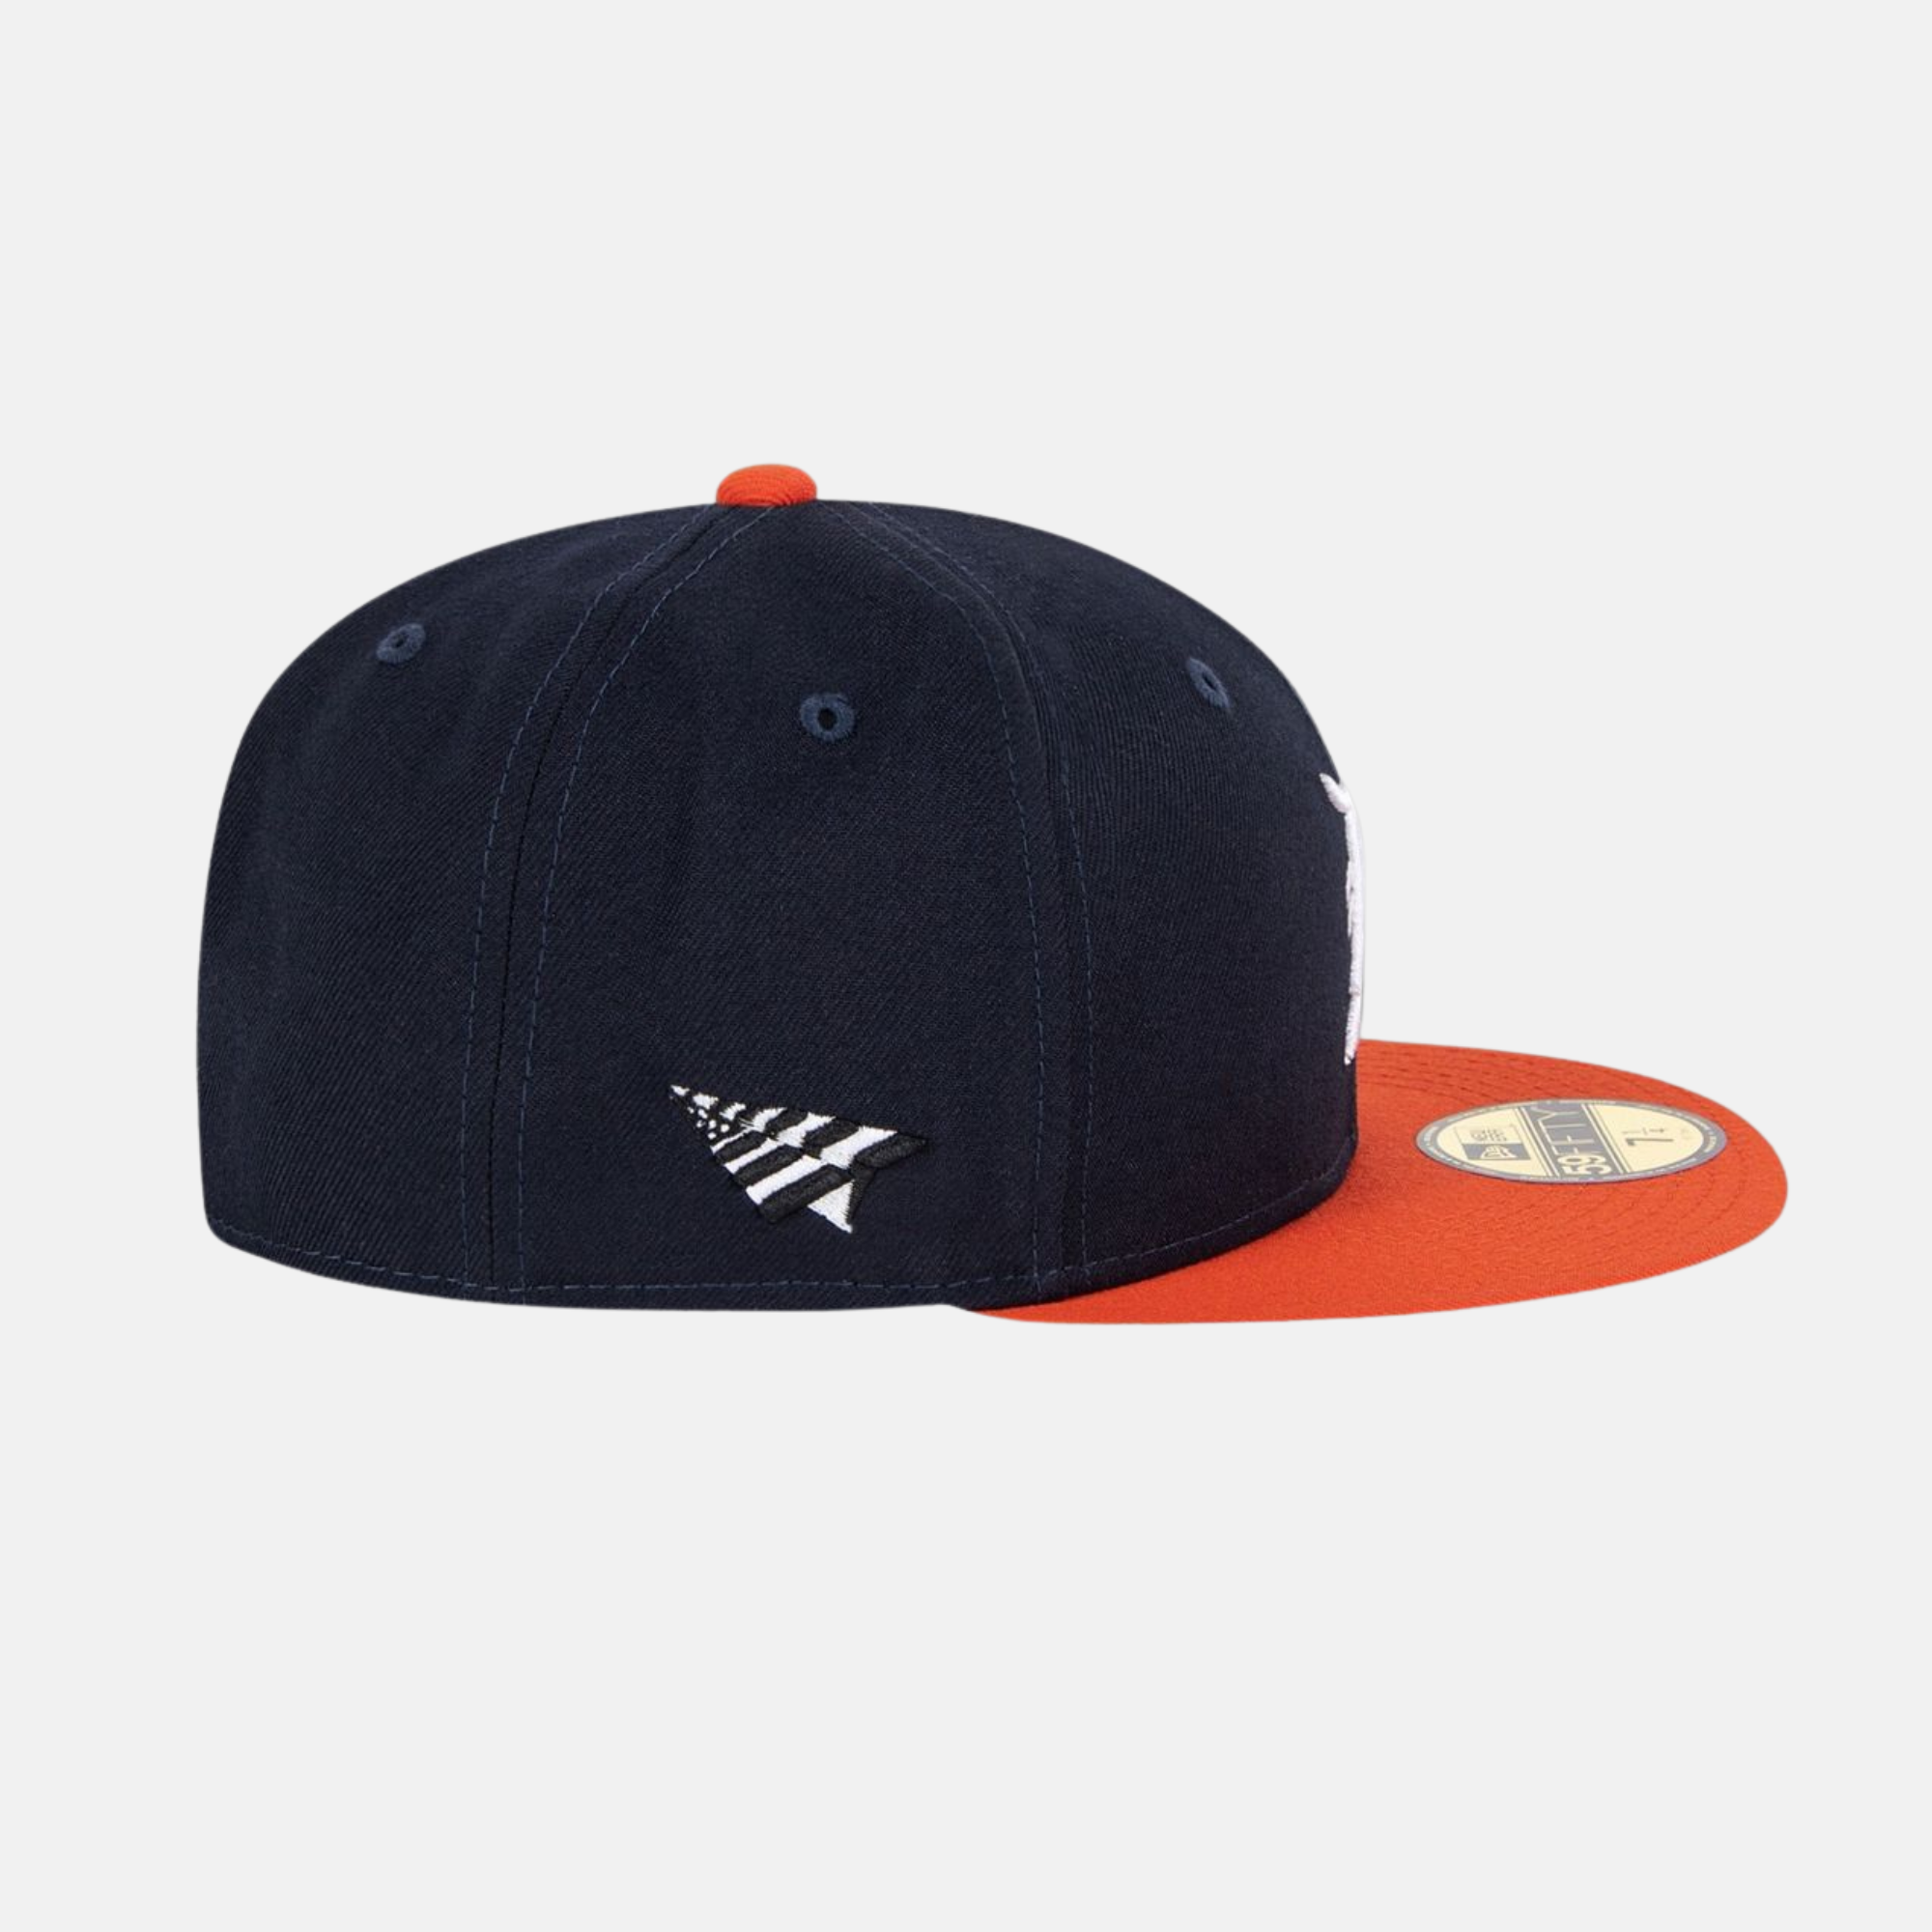 New Era x Paper Planes American Dream 59Fifty Fitted Hat Black